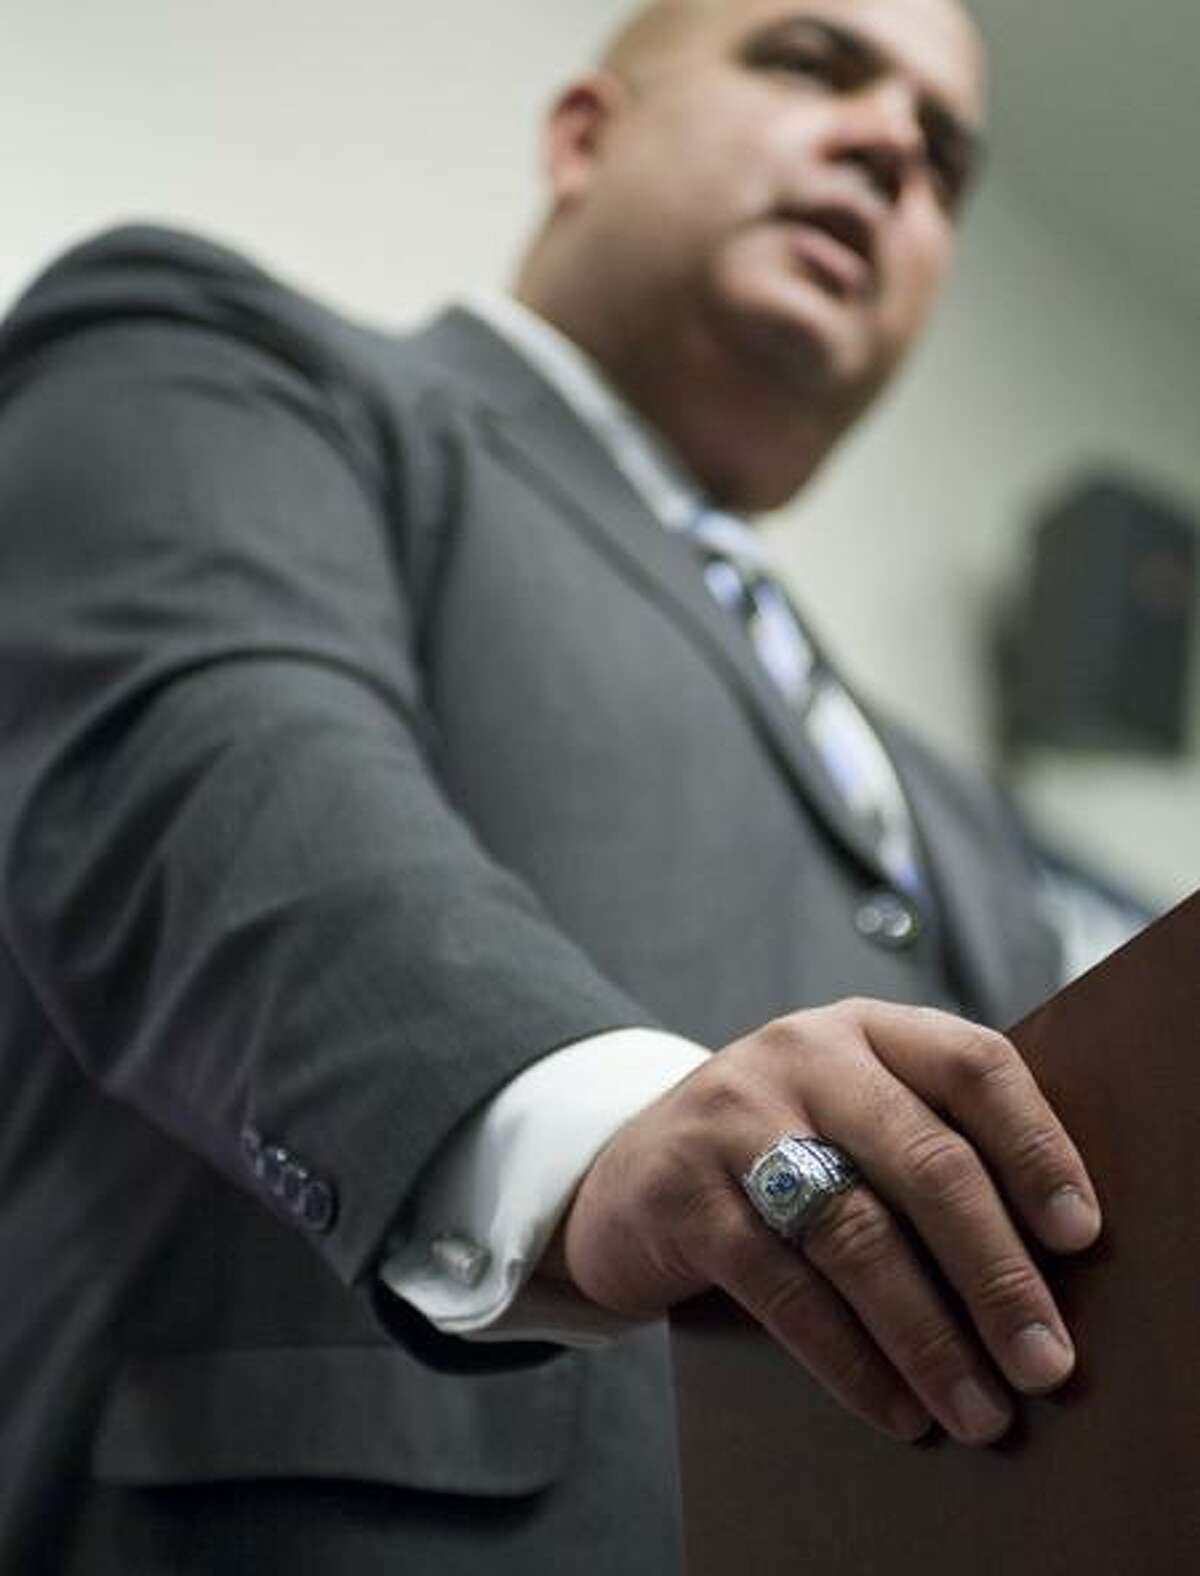 Former University at Buffalo Athletic Director Warde Manuel wears a championship ring from his former school as he is introduced as the new athletic director for the University of Connecticut at a news conference in Storrs, Conn., Monday, Feb. 13, 2012. (AP Photo/Jessica Hill)